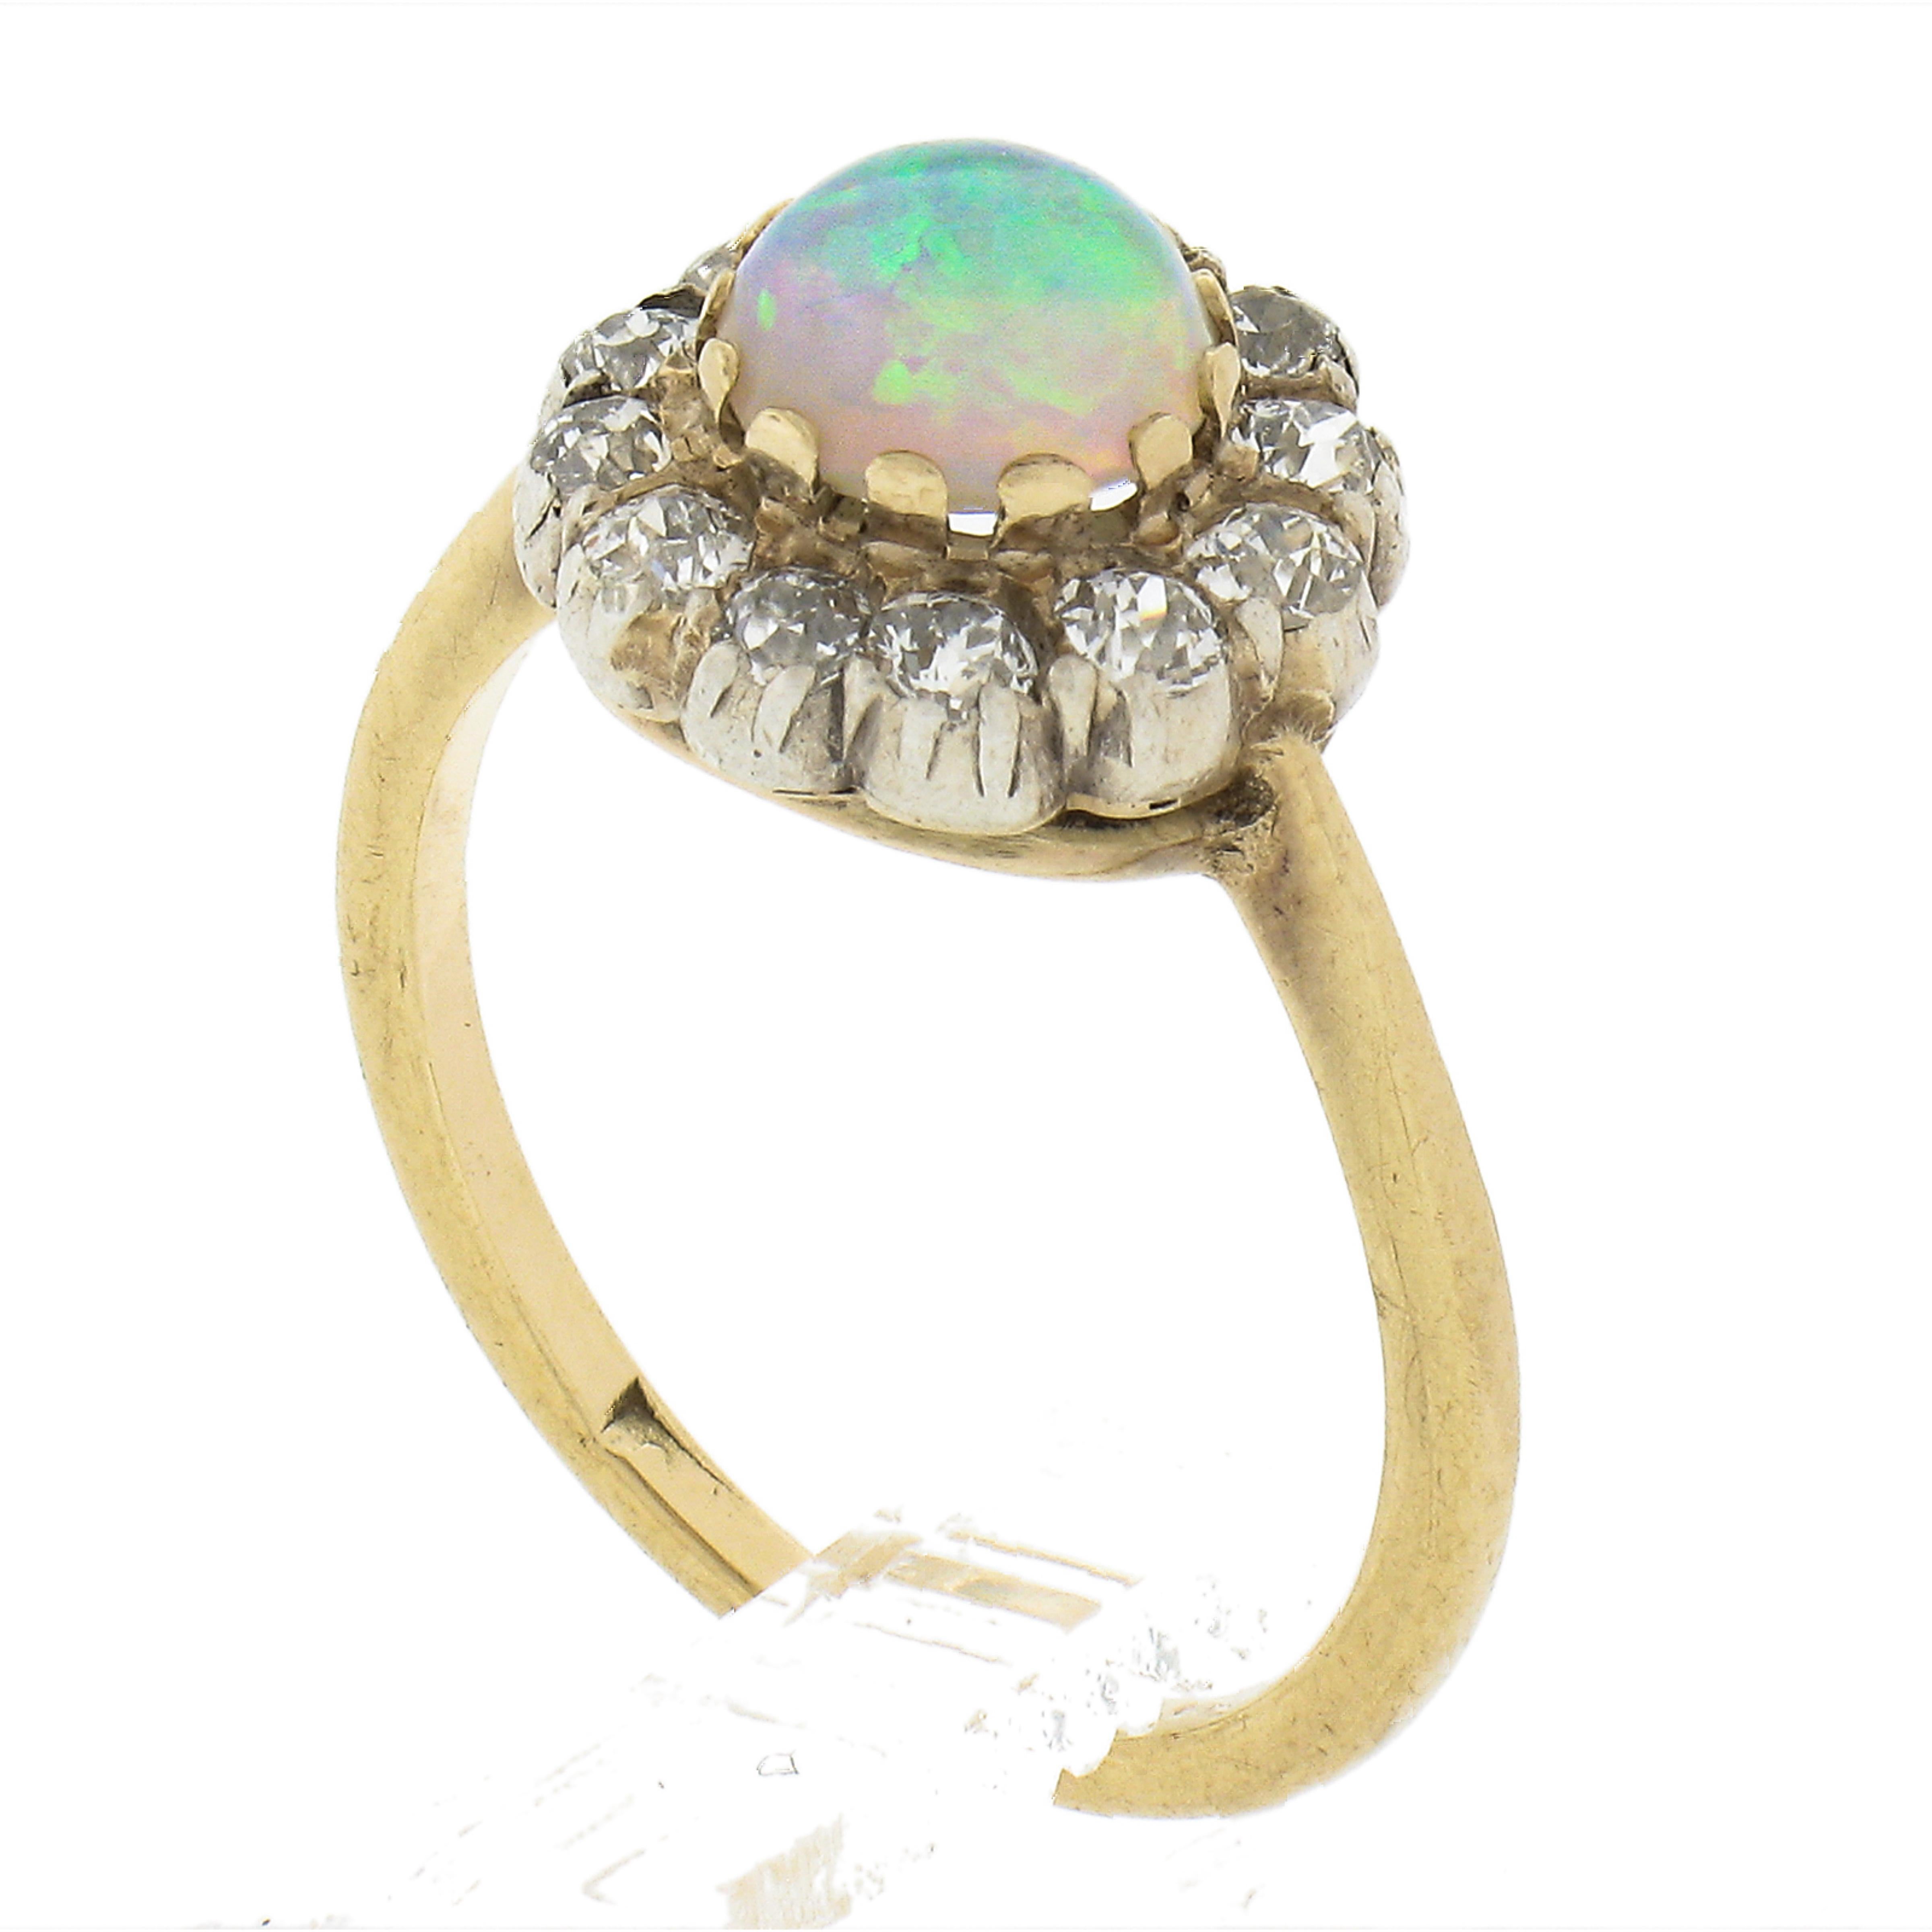 Antique Victorian 9K Gold Round Opal Solitaire w/ Old Cut Diamond Halo Ring 4